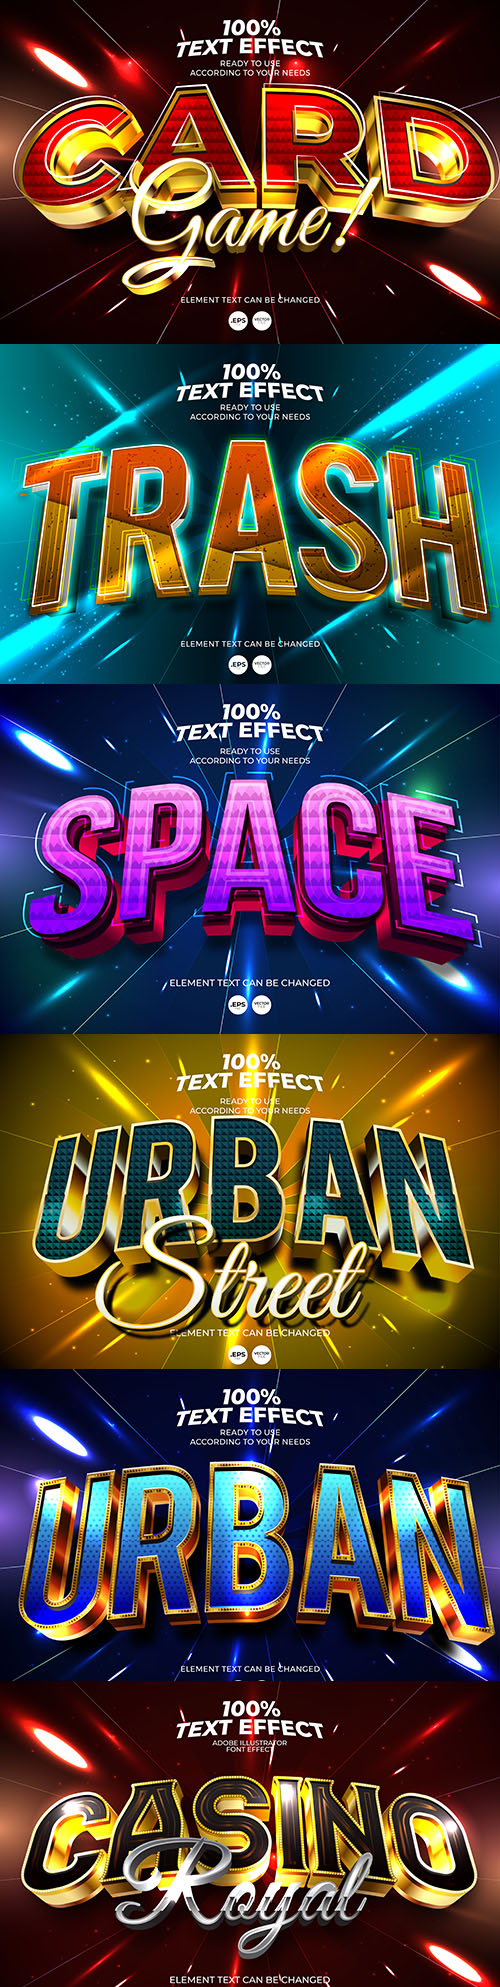 Editable font and 3d effect text design collection illustration 39